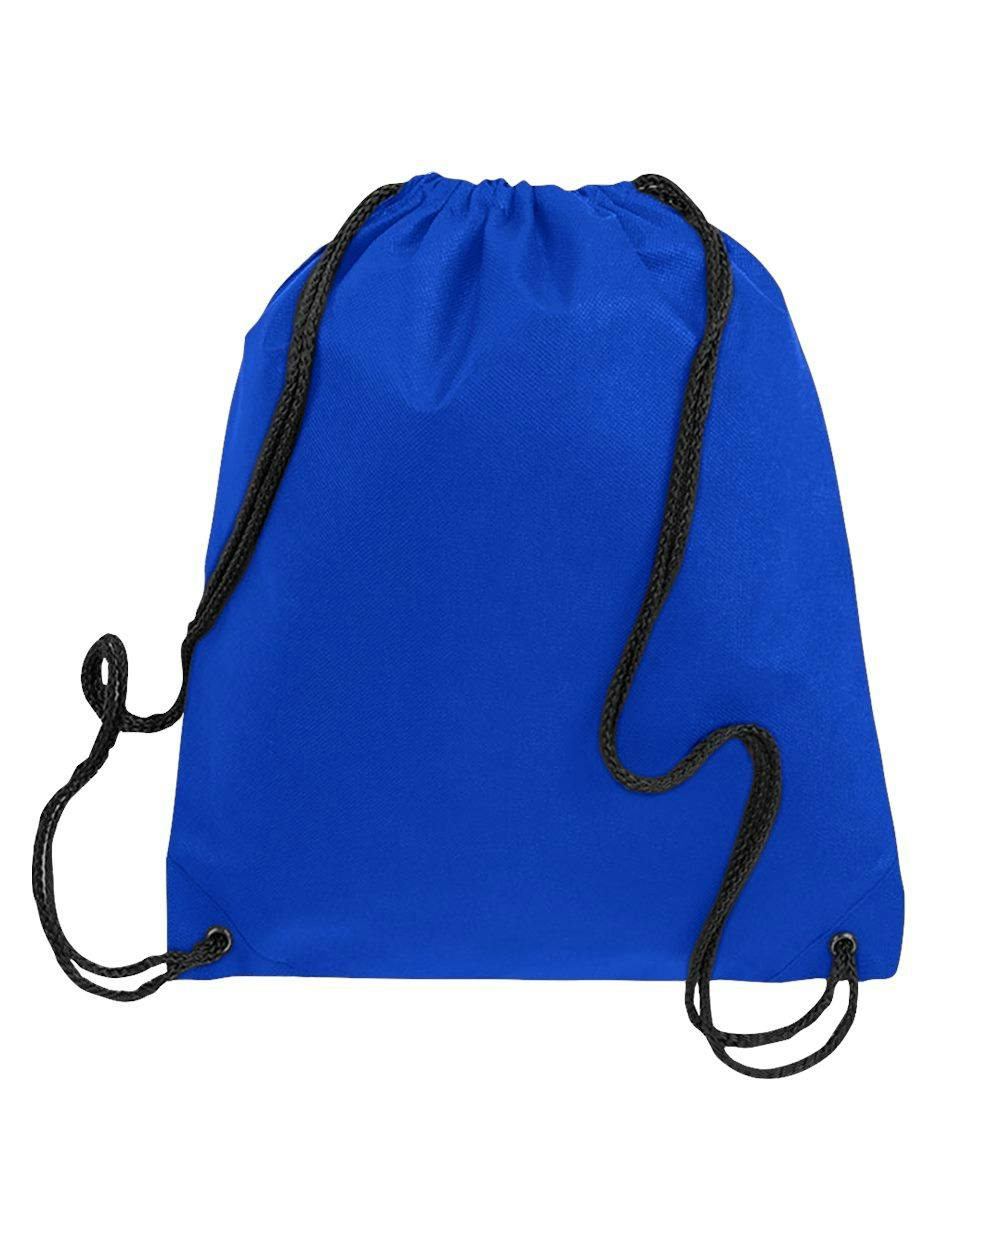 Image for Non-Woven Sportpack - Q1235